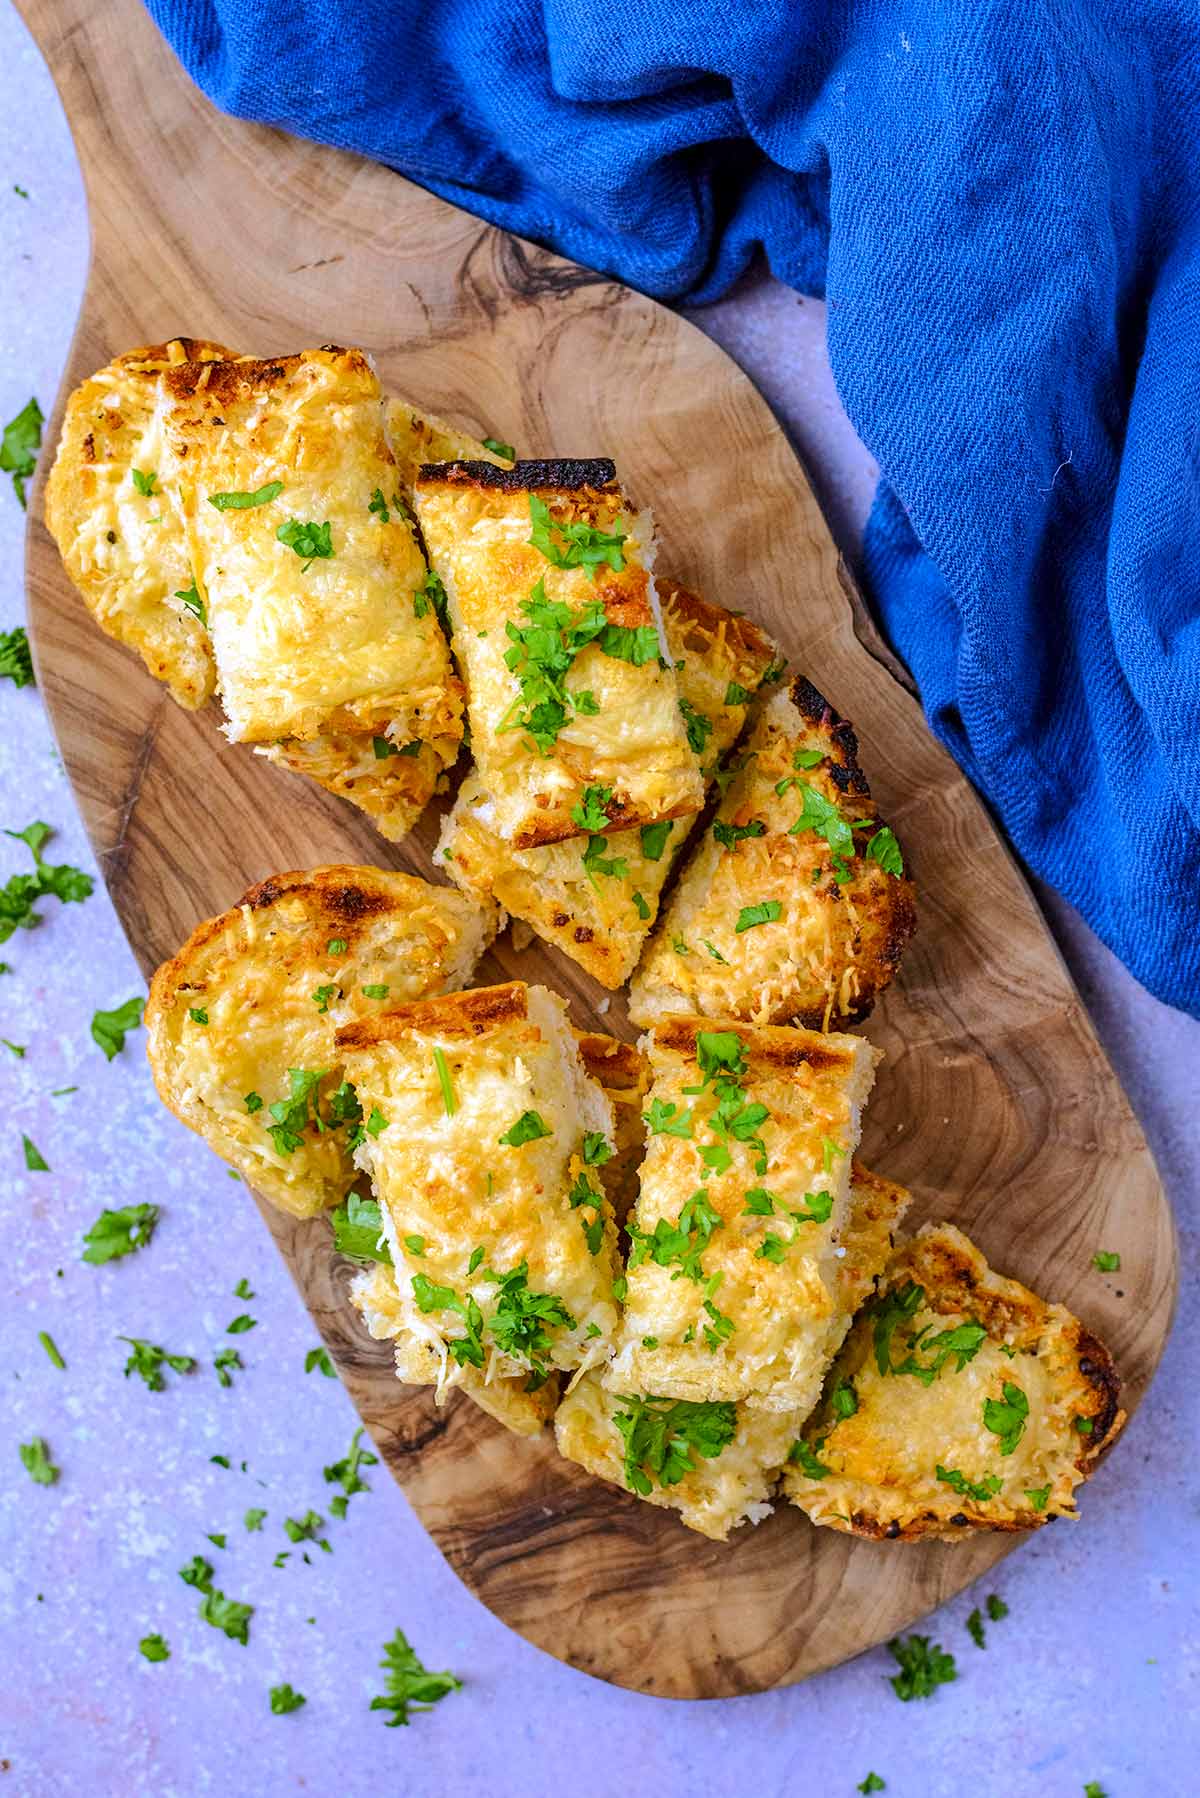 Slices of cheese topped garlic bread on a wooden serving board.